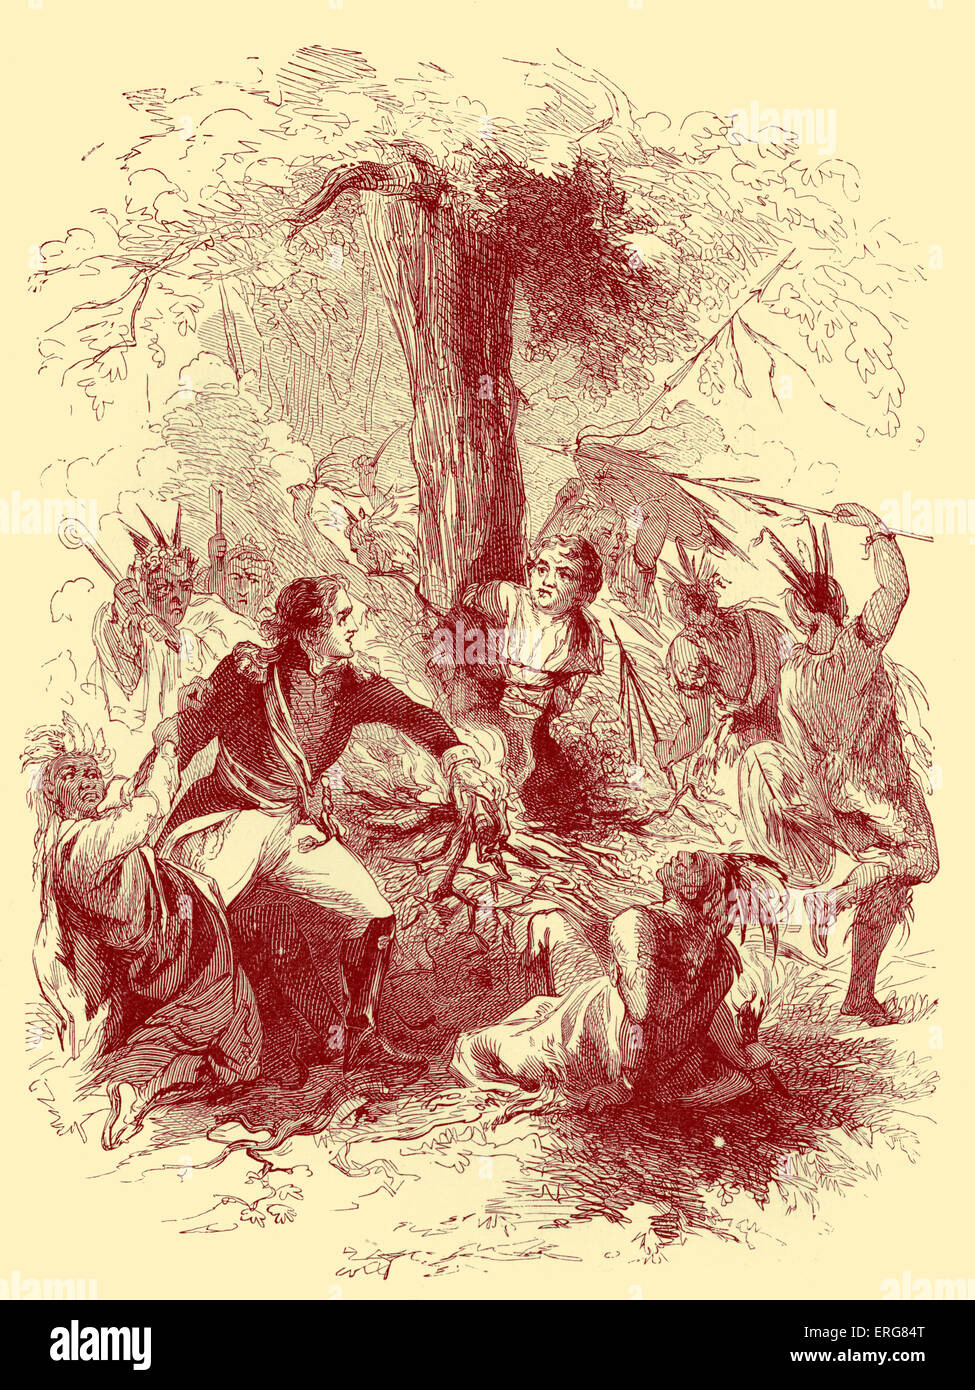 The rescue of Israel Putnam, published in 1887. Putnam, an American army General, was captured by the Caughnawaga Mohawk Stock Photo